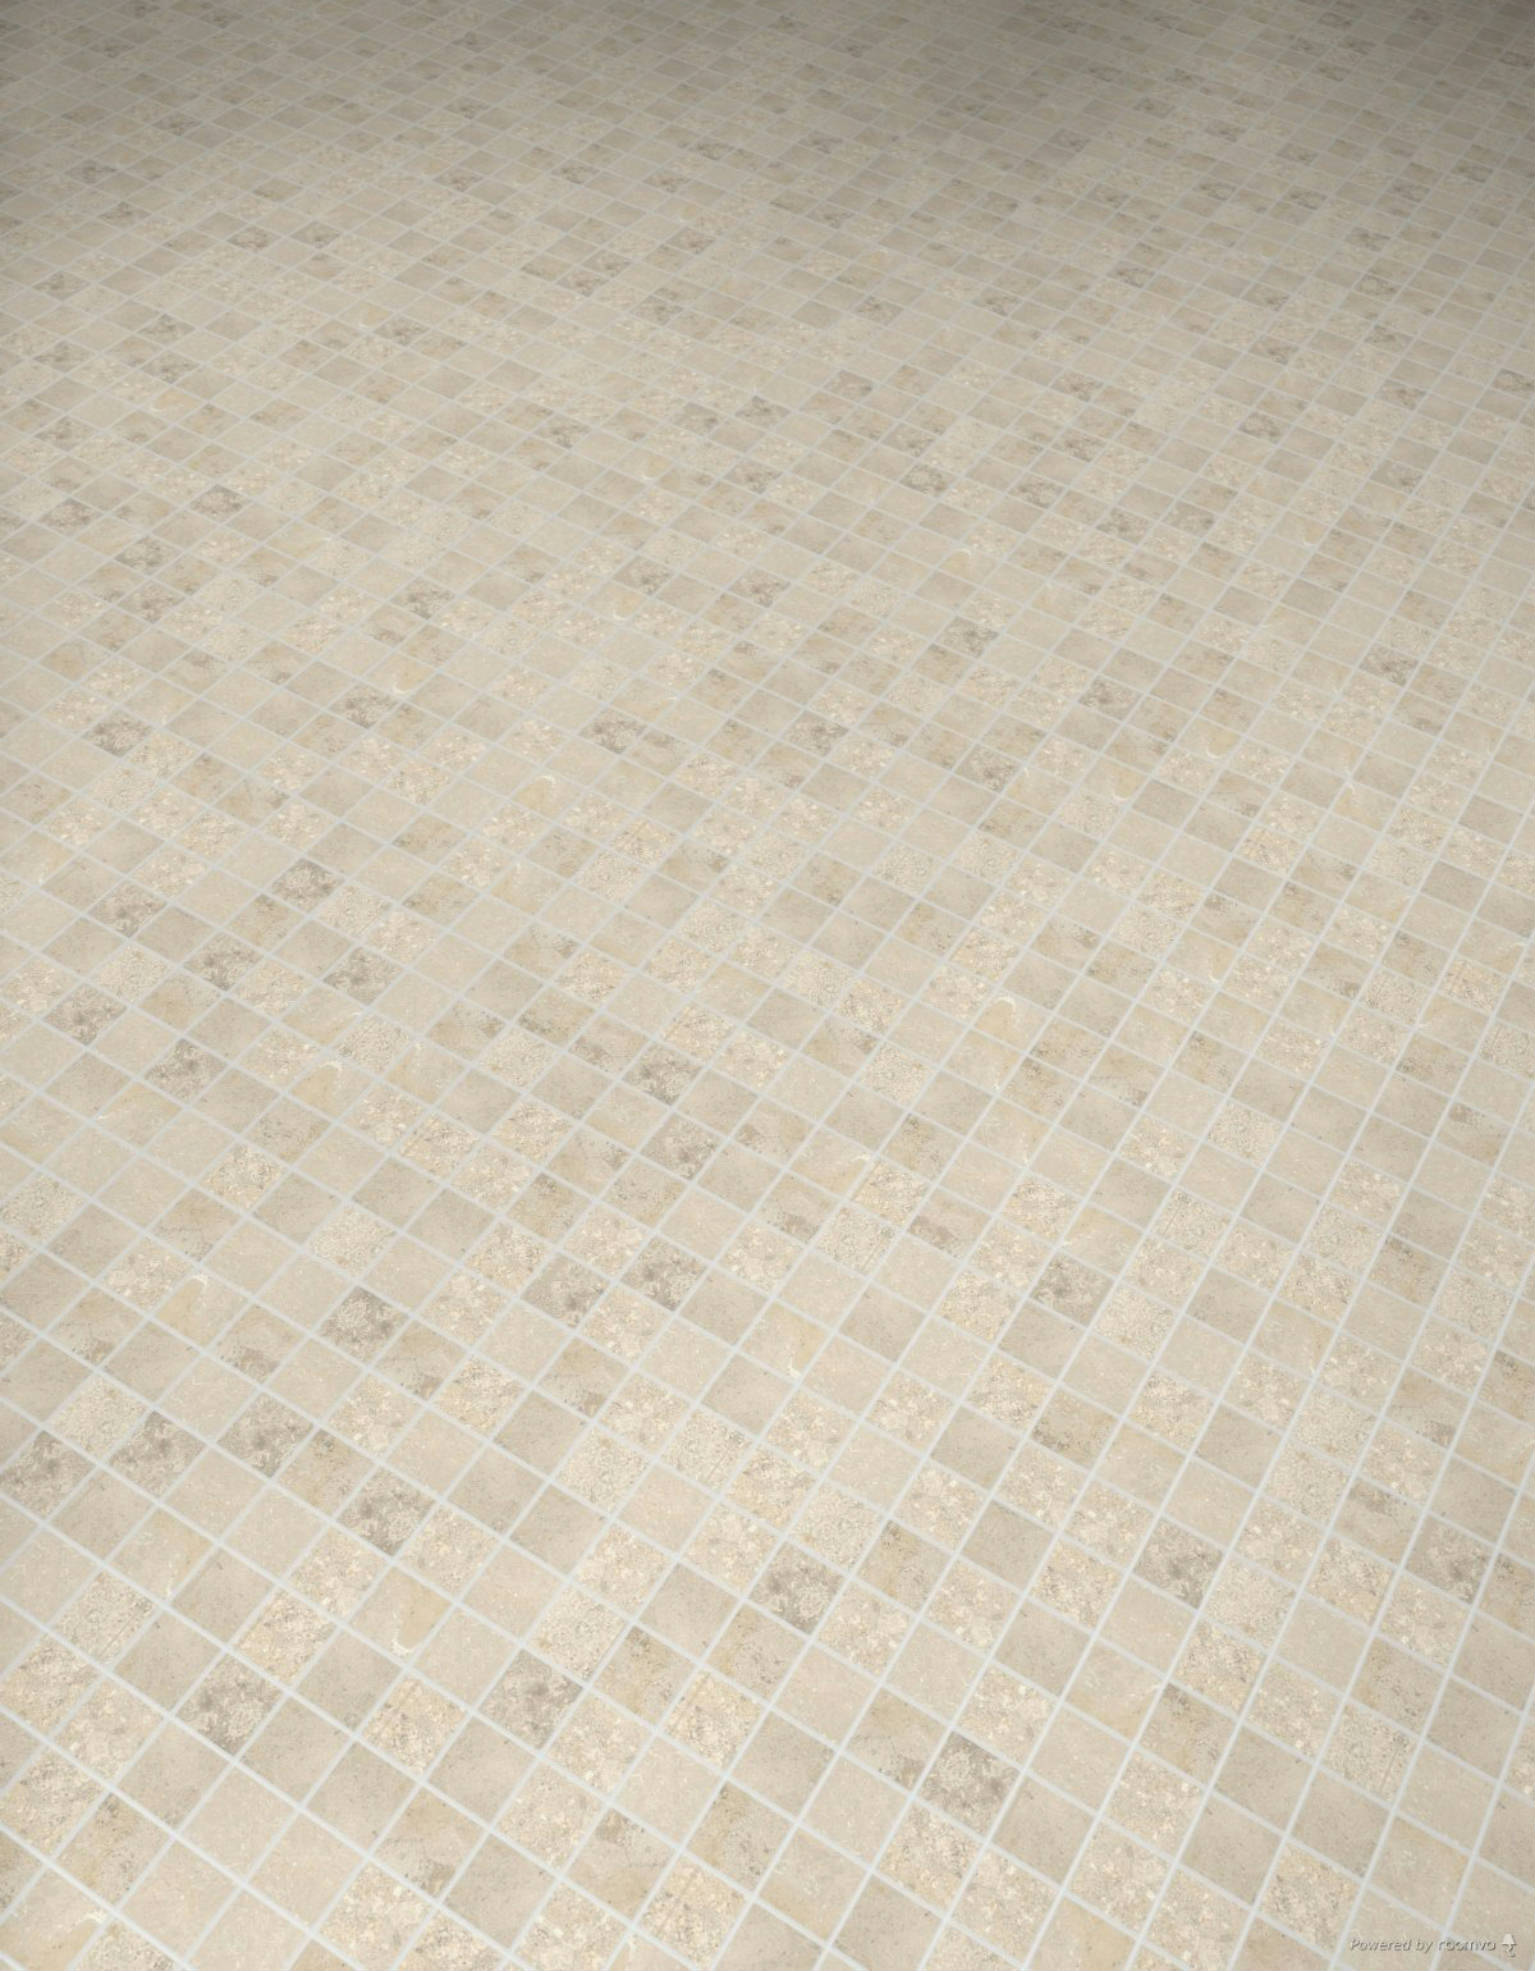 Elevation Dor Sand 2X2 Mosaic | Qualis Ceramica | Luxury Tile and Vinyl at affordable prices